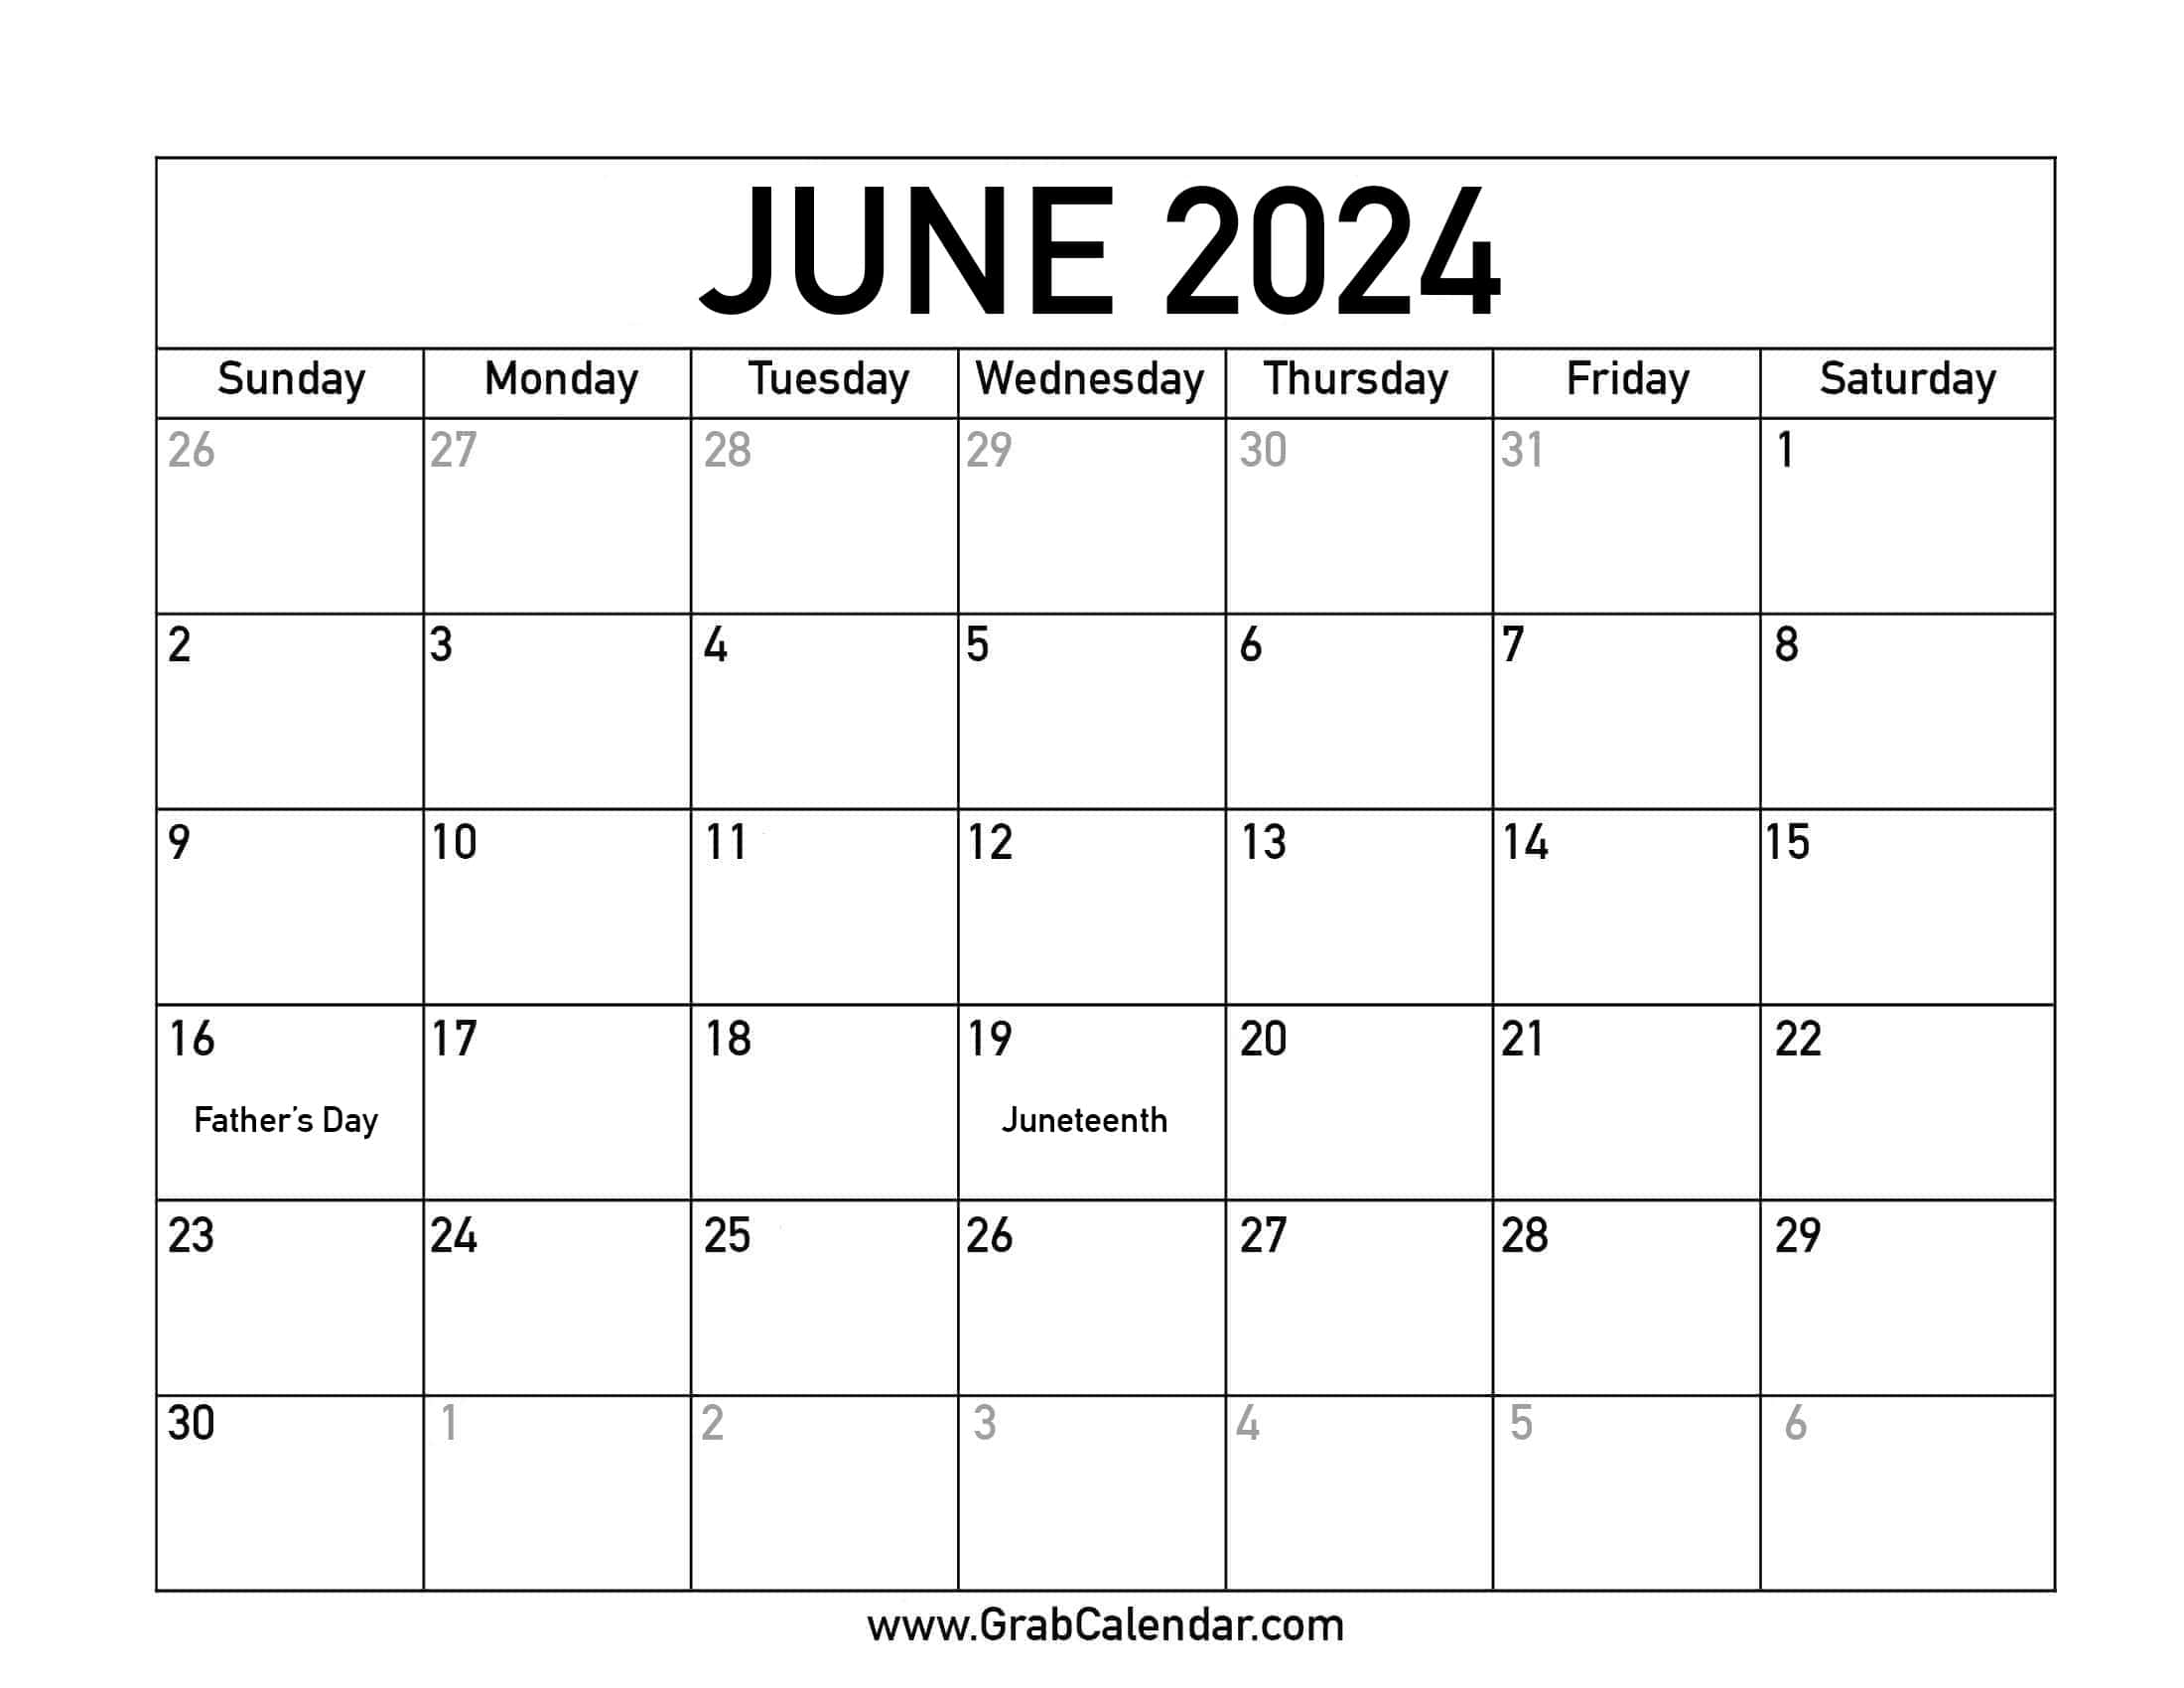 June 2024 Important Days Betsy Charity